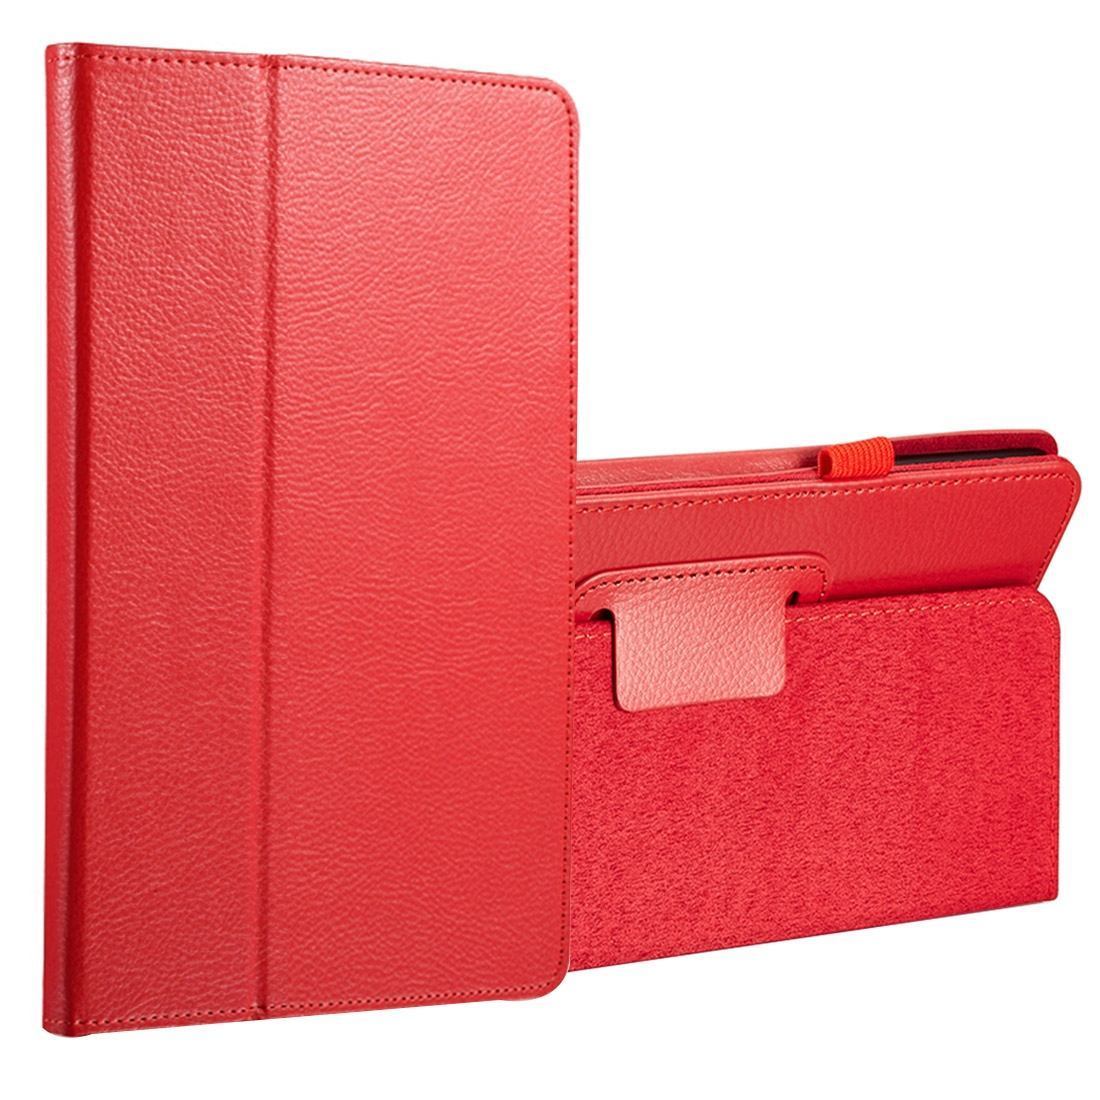 For Samsung Galaxy Tab A 8.0 SM-T380,T385 Case,Lychee Leather Cover,Red